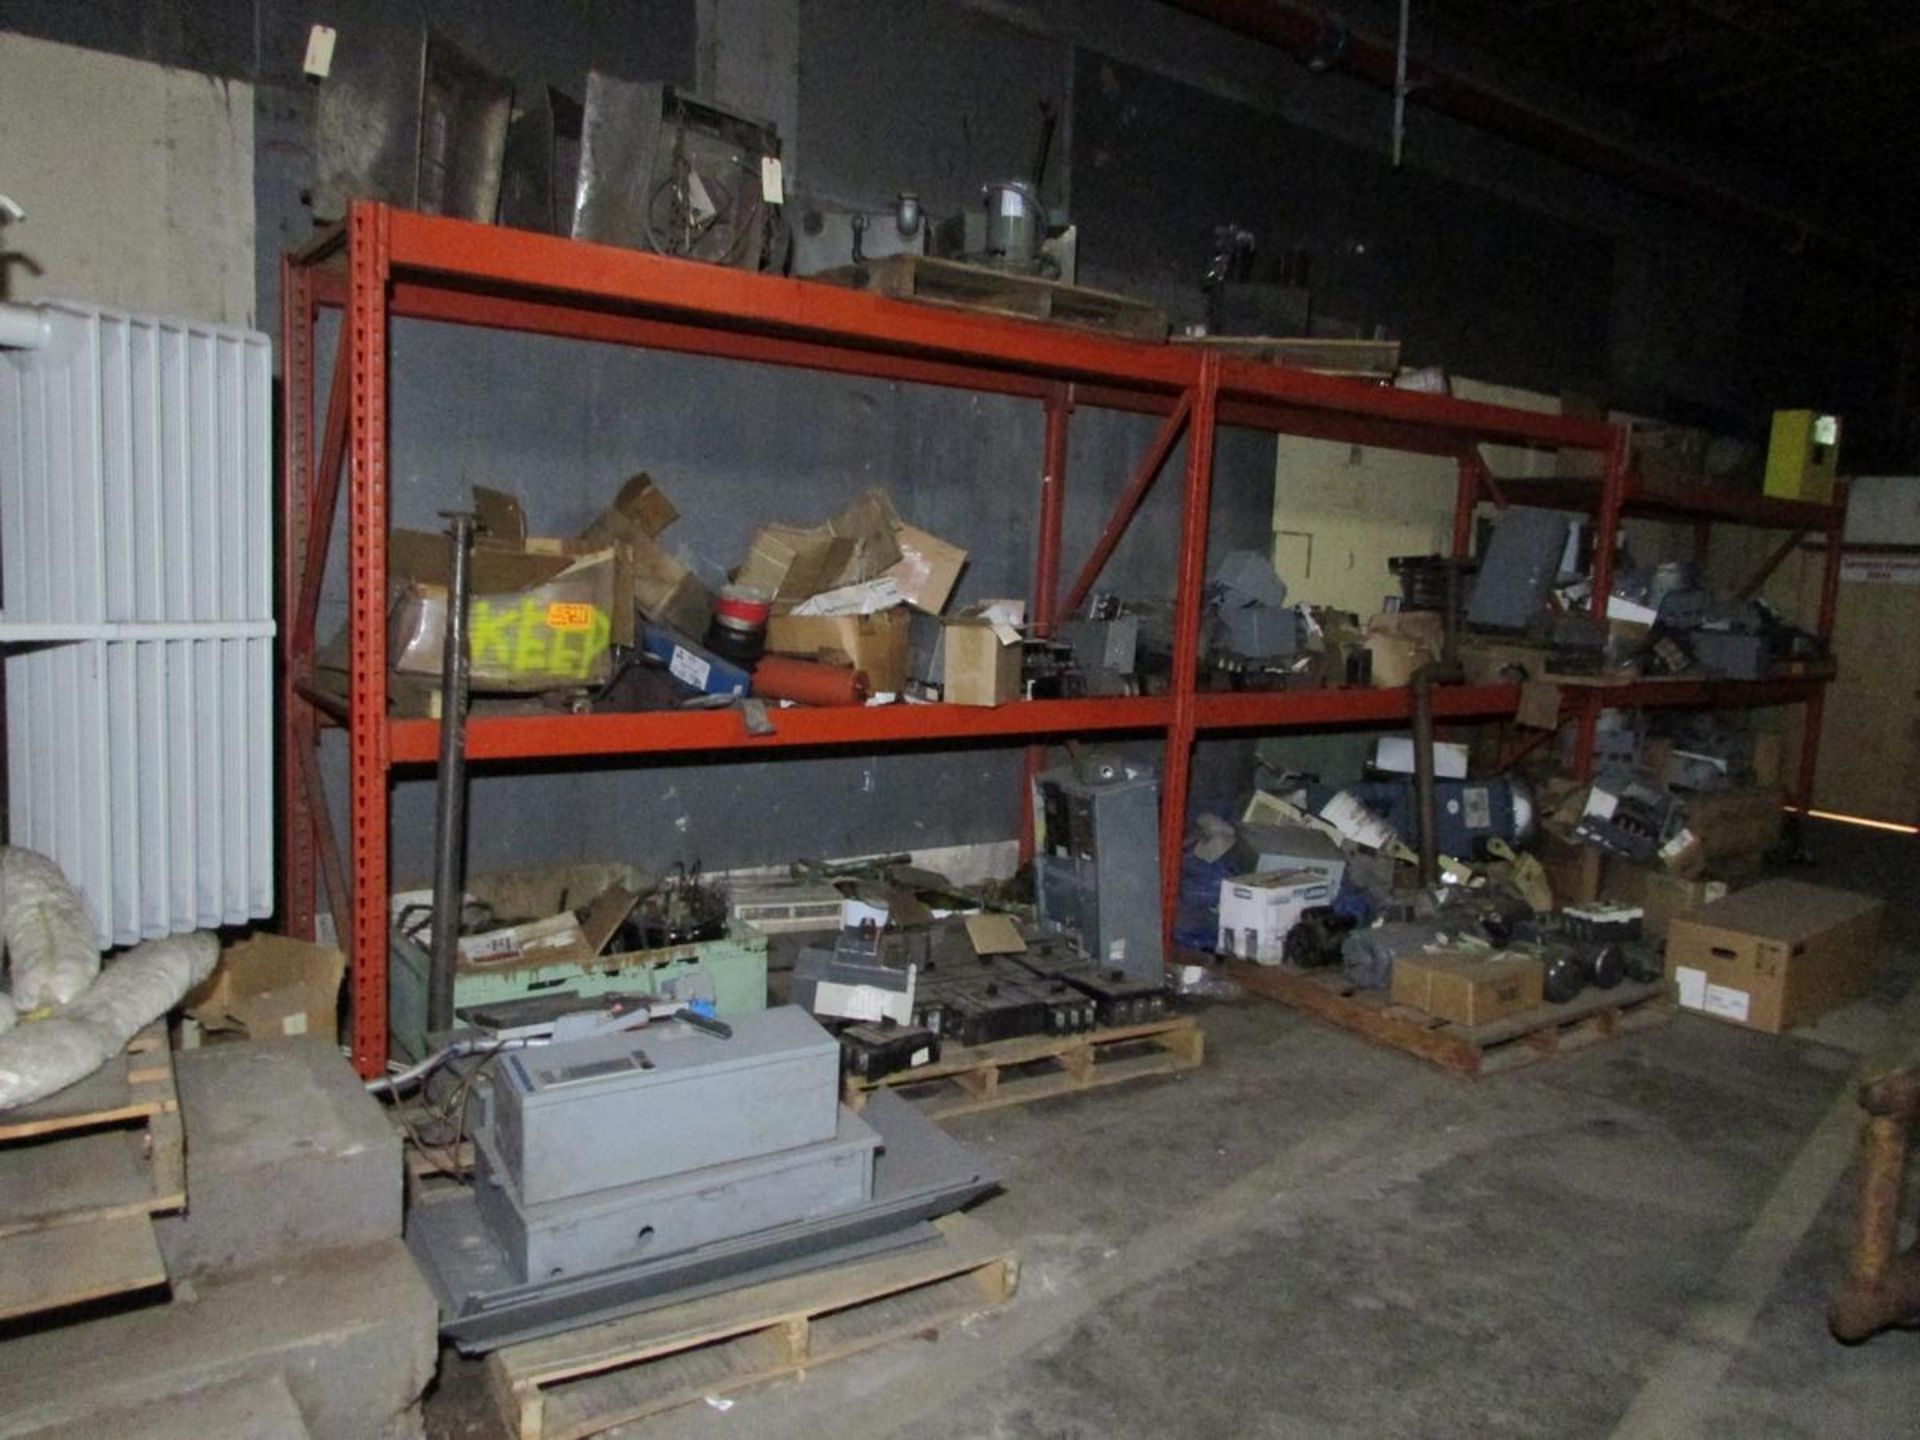 Remaining Contents of Storage Room